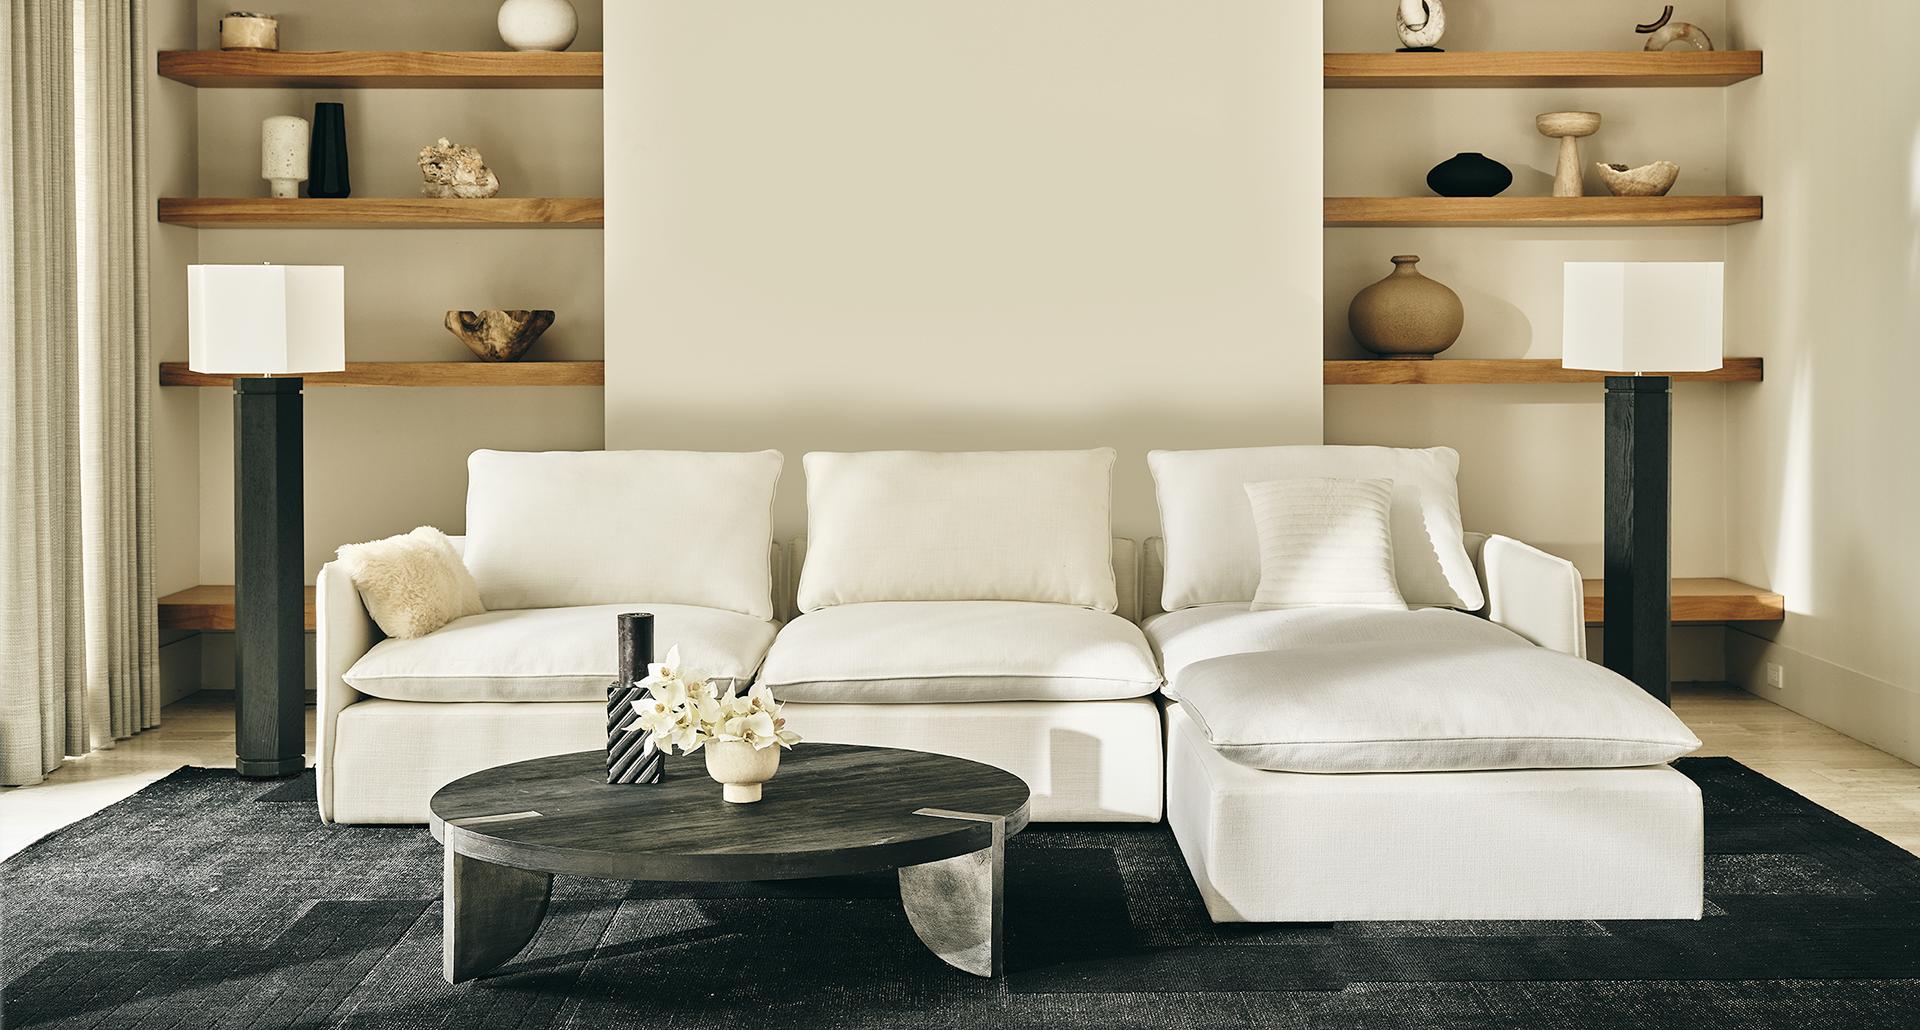 The Upholstery Event, Up to 25% off sofas, sectionals and chairs